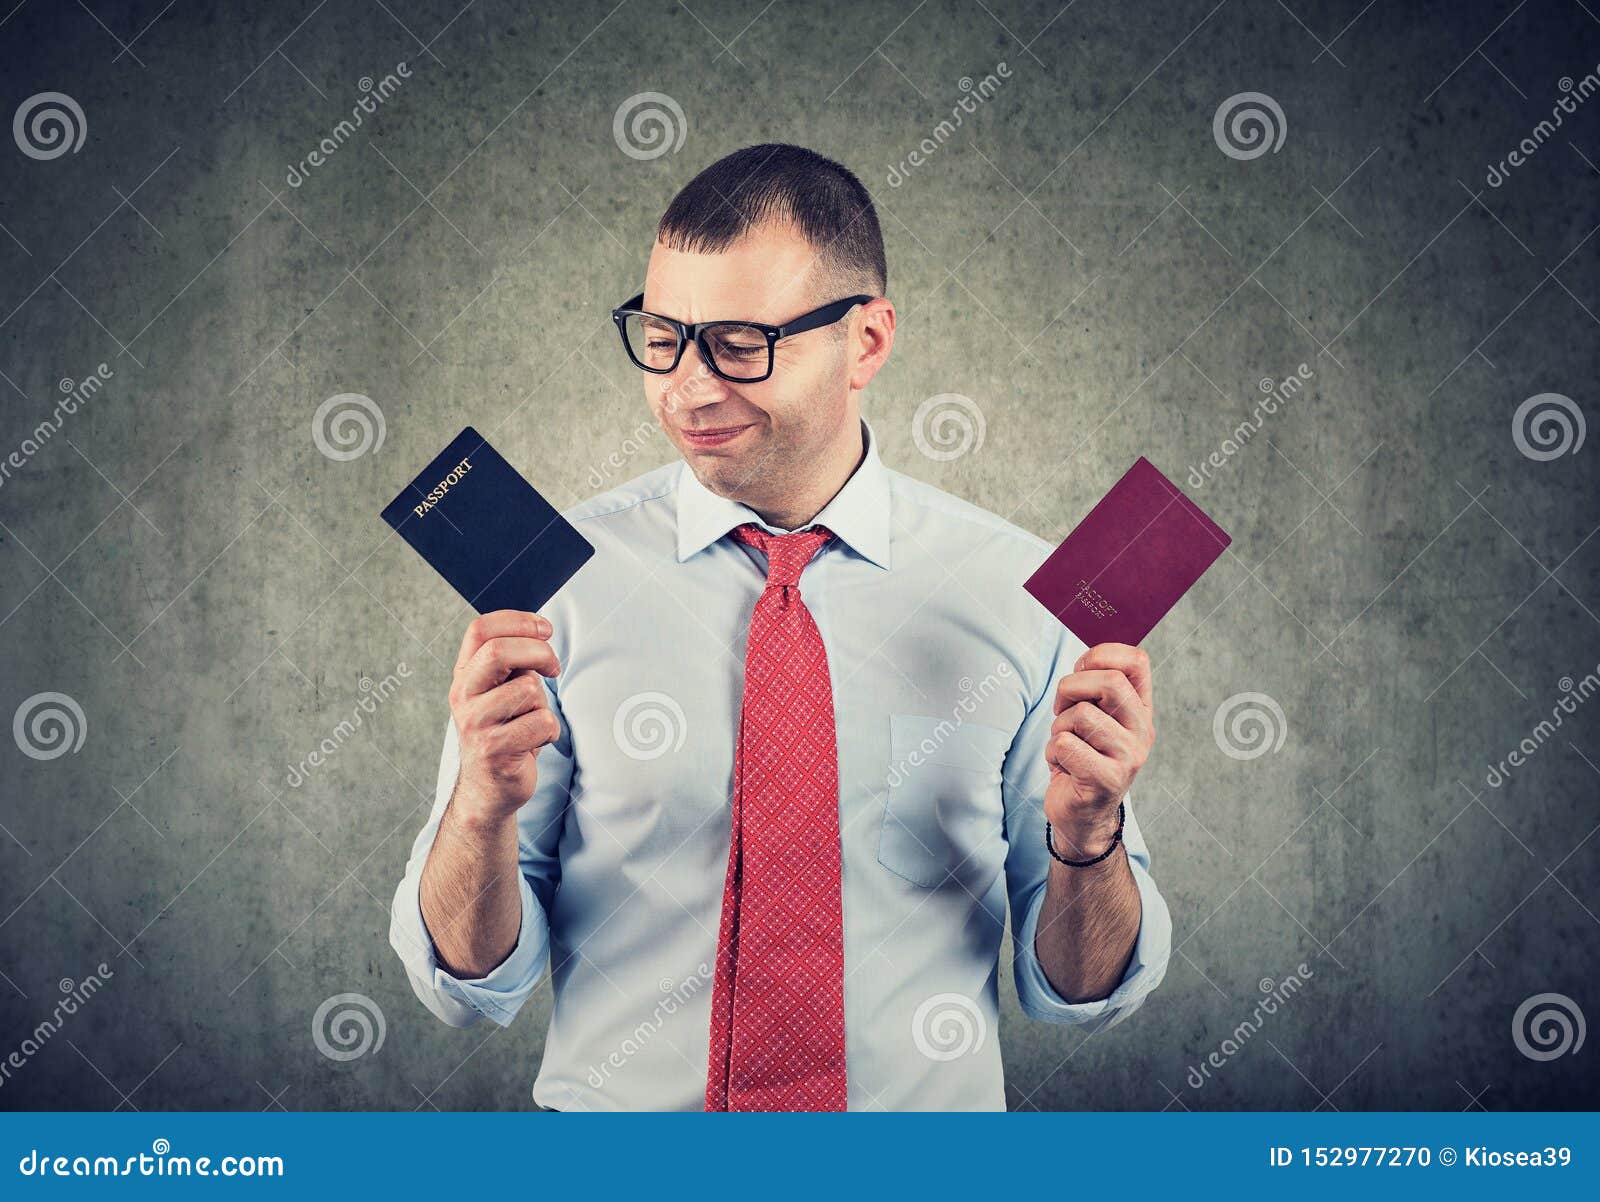 happy business man with two passports, dual citizenship